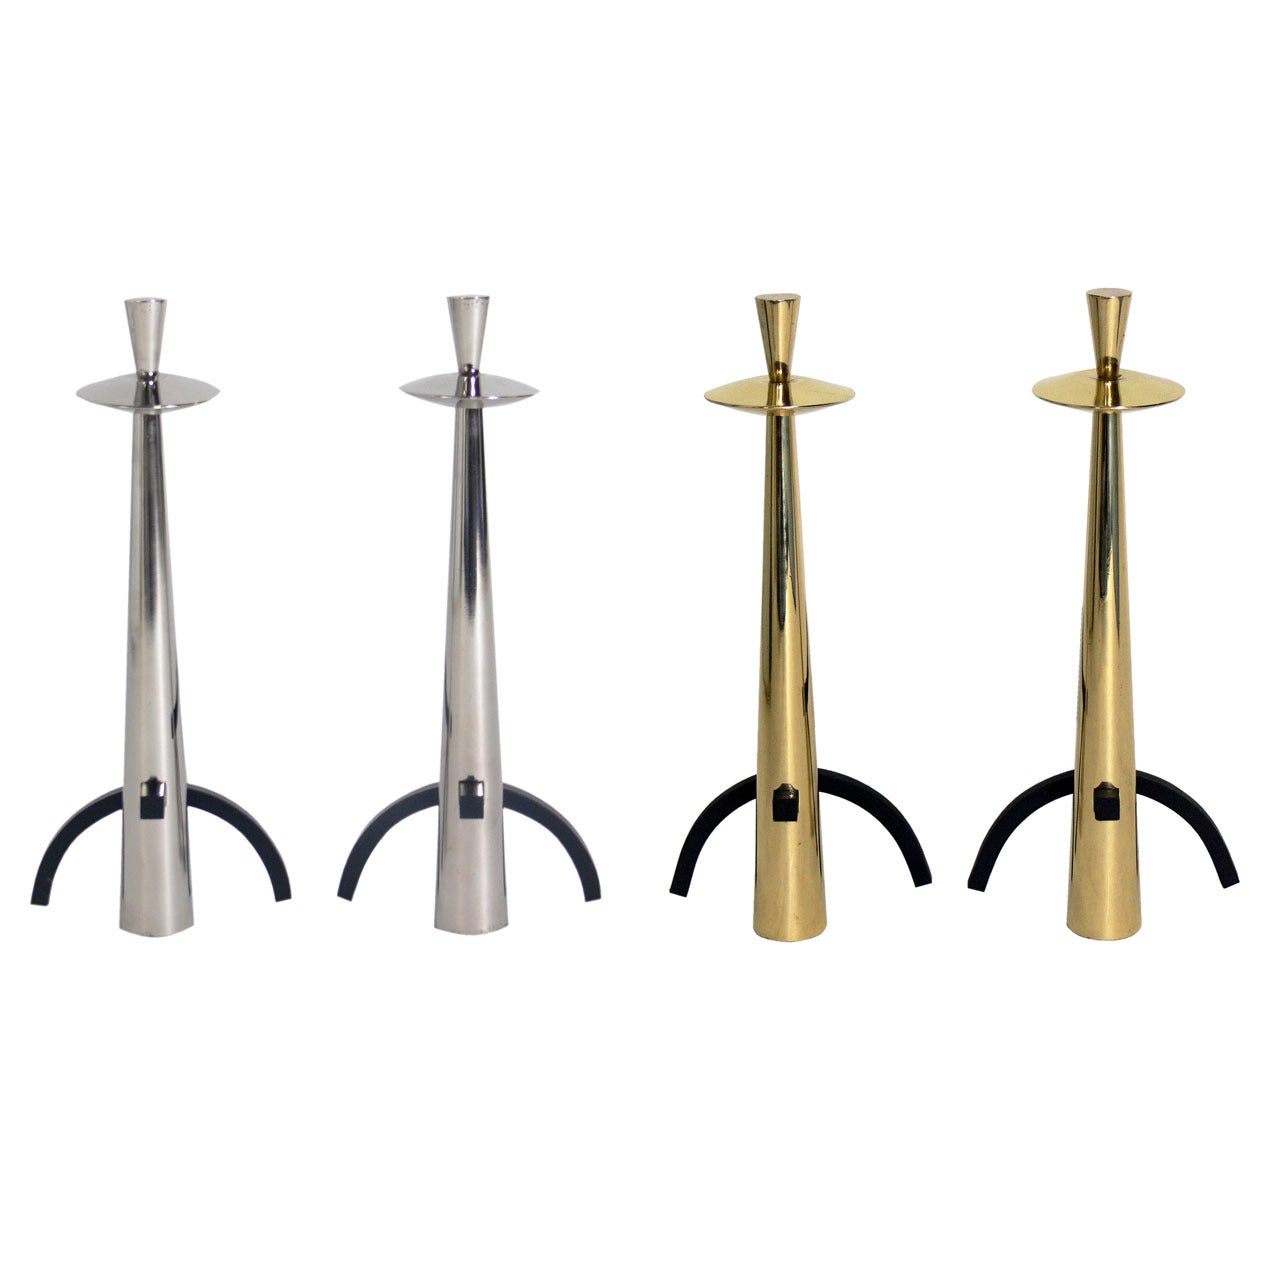 "Space Needle" Andirons in Nickel or Brass